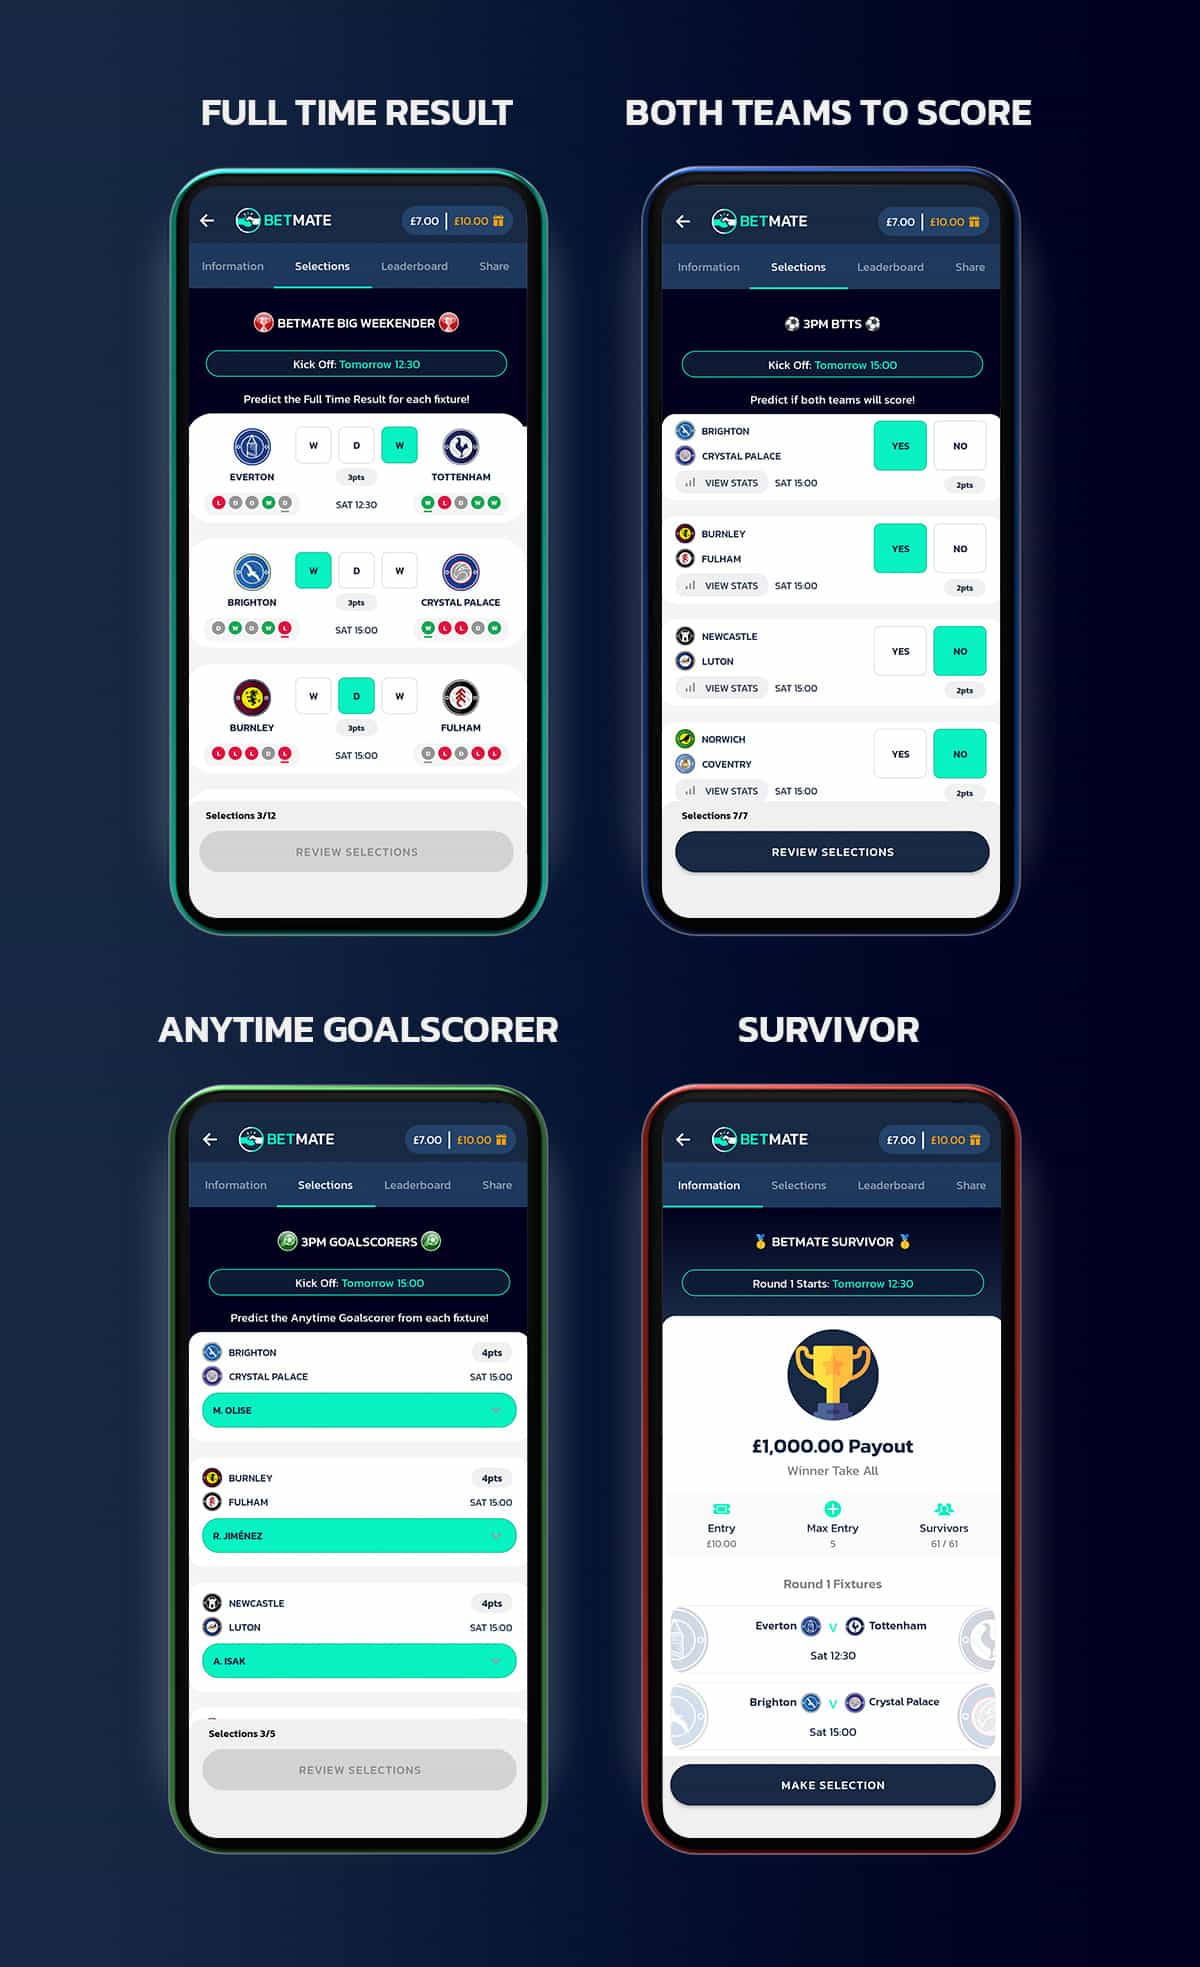 Four screenshots showing some of Betmates games - Full Time Result, Both Teams To Score, Anytimes Goalscorer and Survivor.